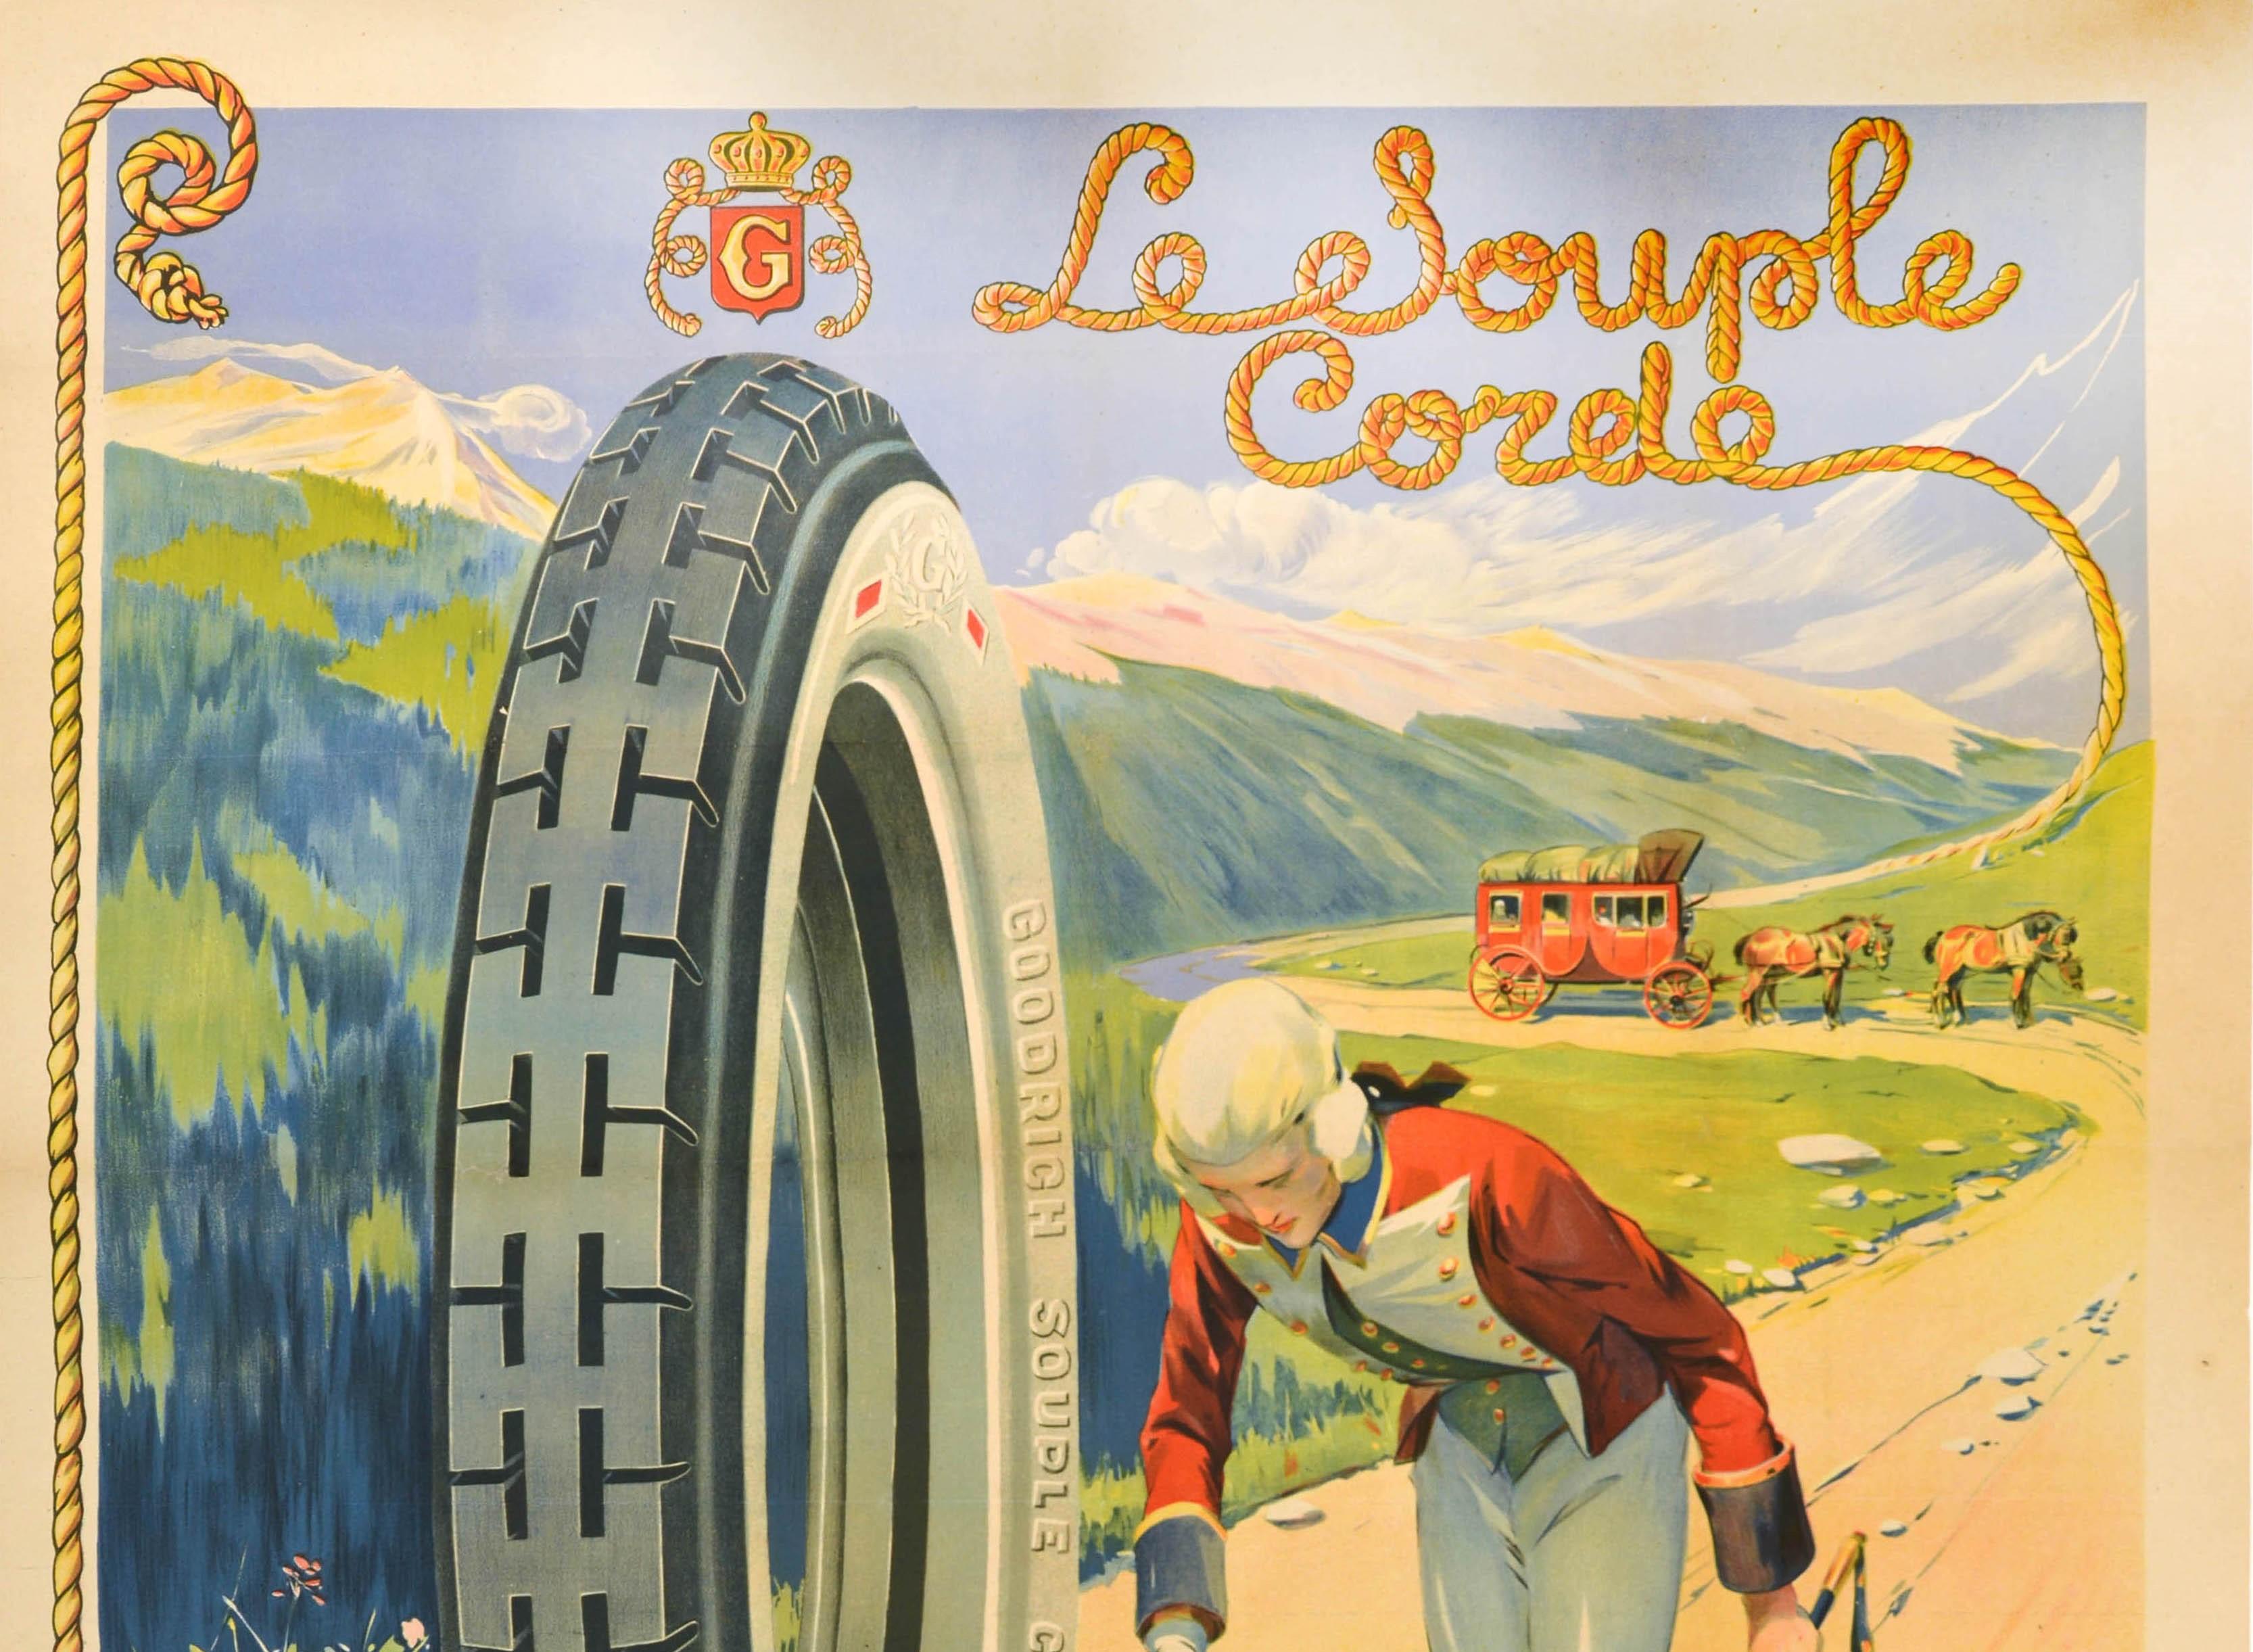 Original antique tire advertising poster for La Souple Corde Goodrich Le Maitre de la Route/The Master of the Roads featuring a great illustration depicting a smartly dressed coachman wearing a wig and holding his hat and whip, bowing to a large